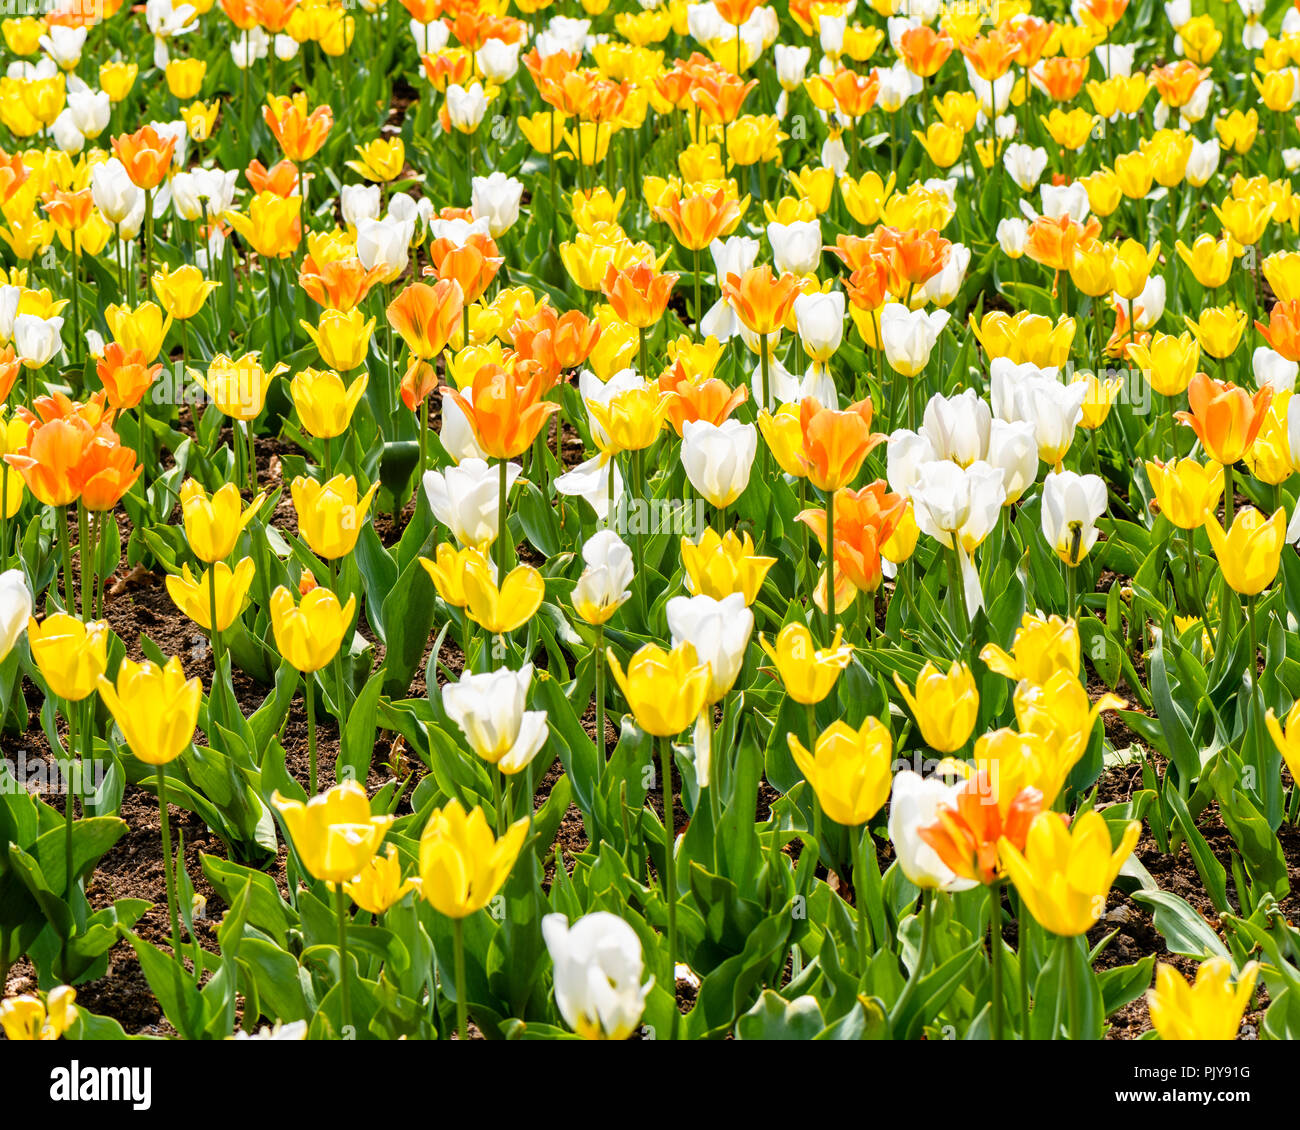 A Garden Bed Of Orange, White, And Yellow Tulips Stock Photo